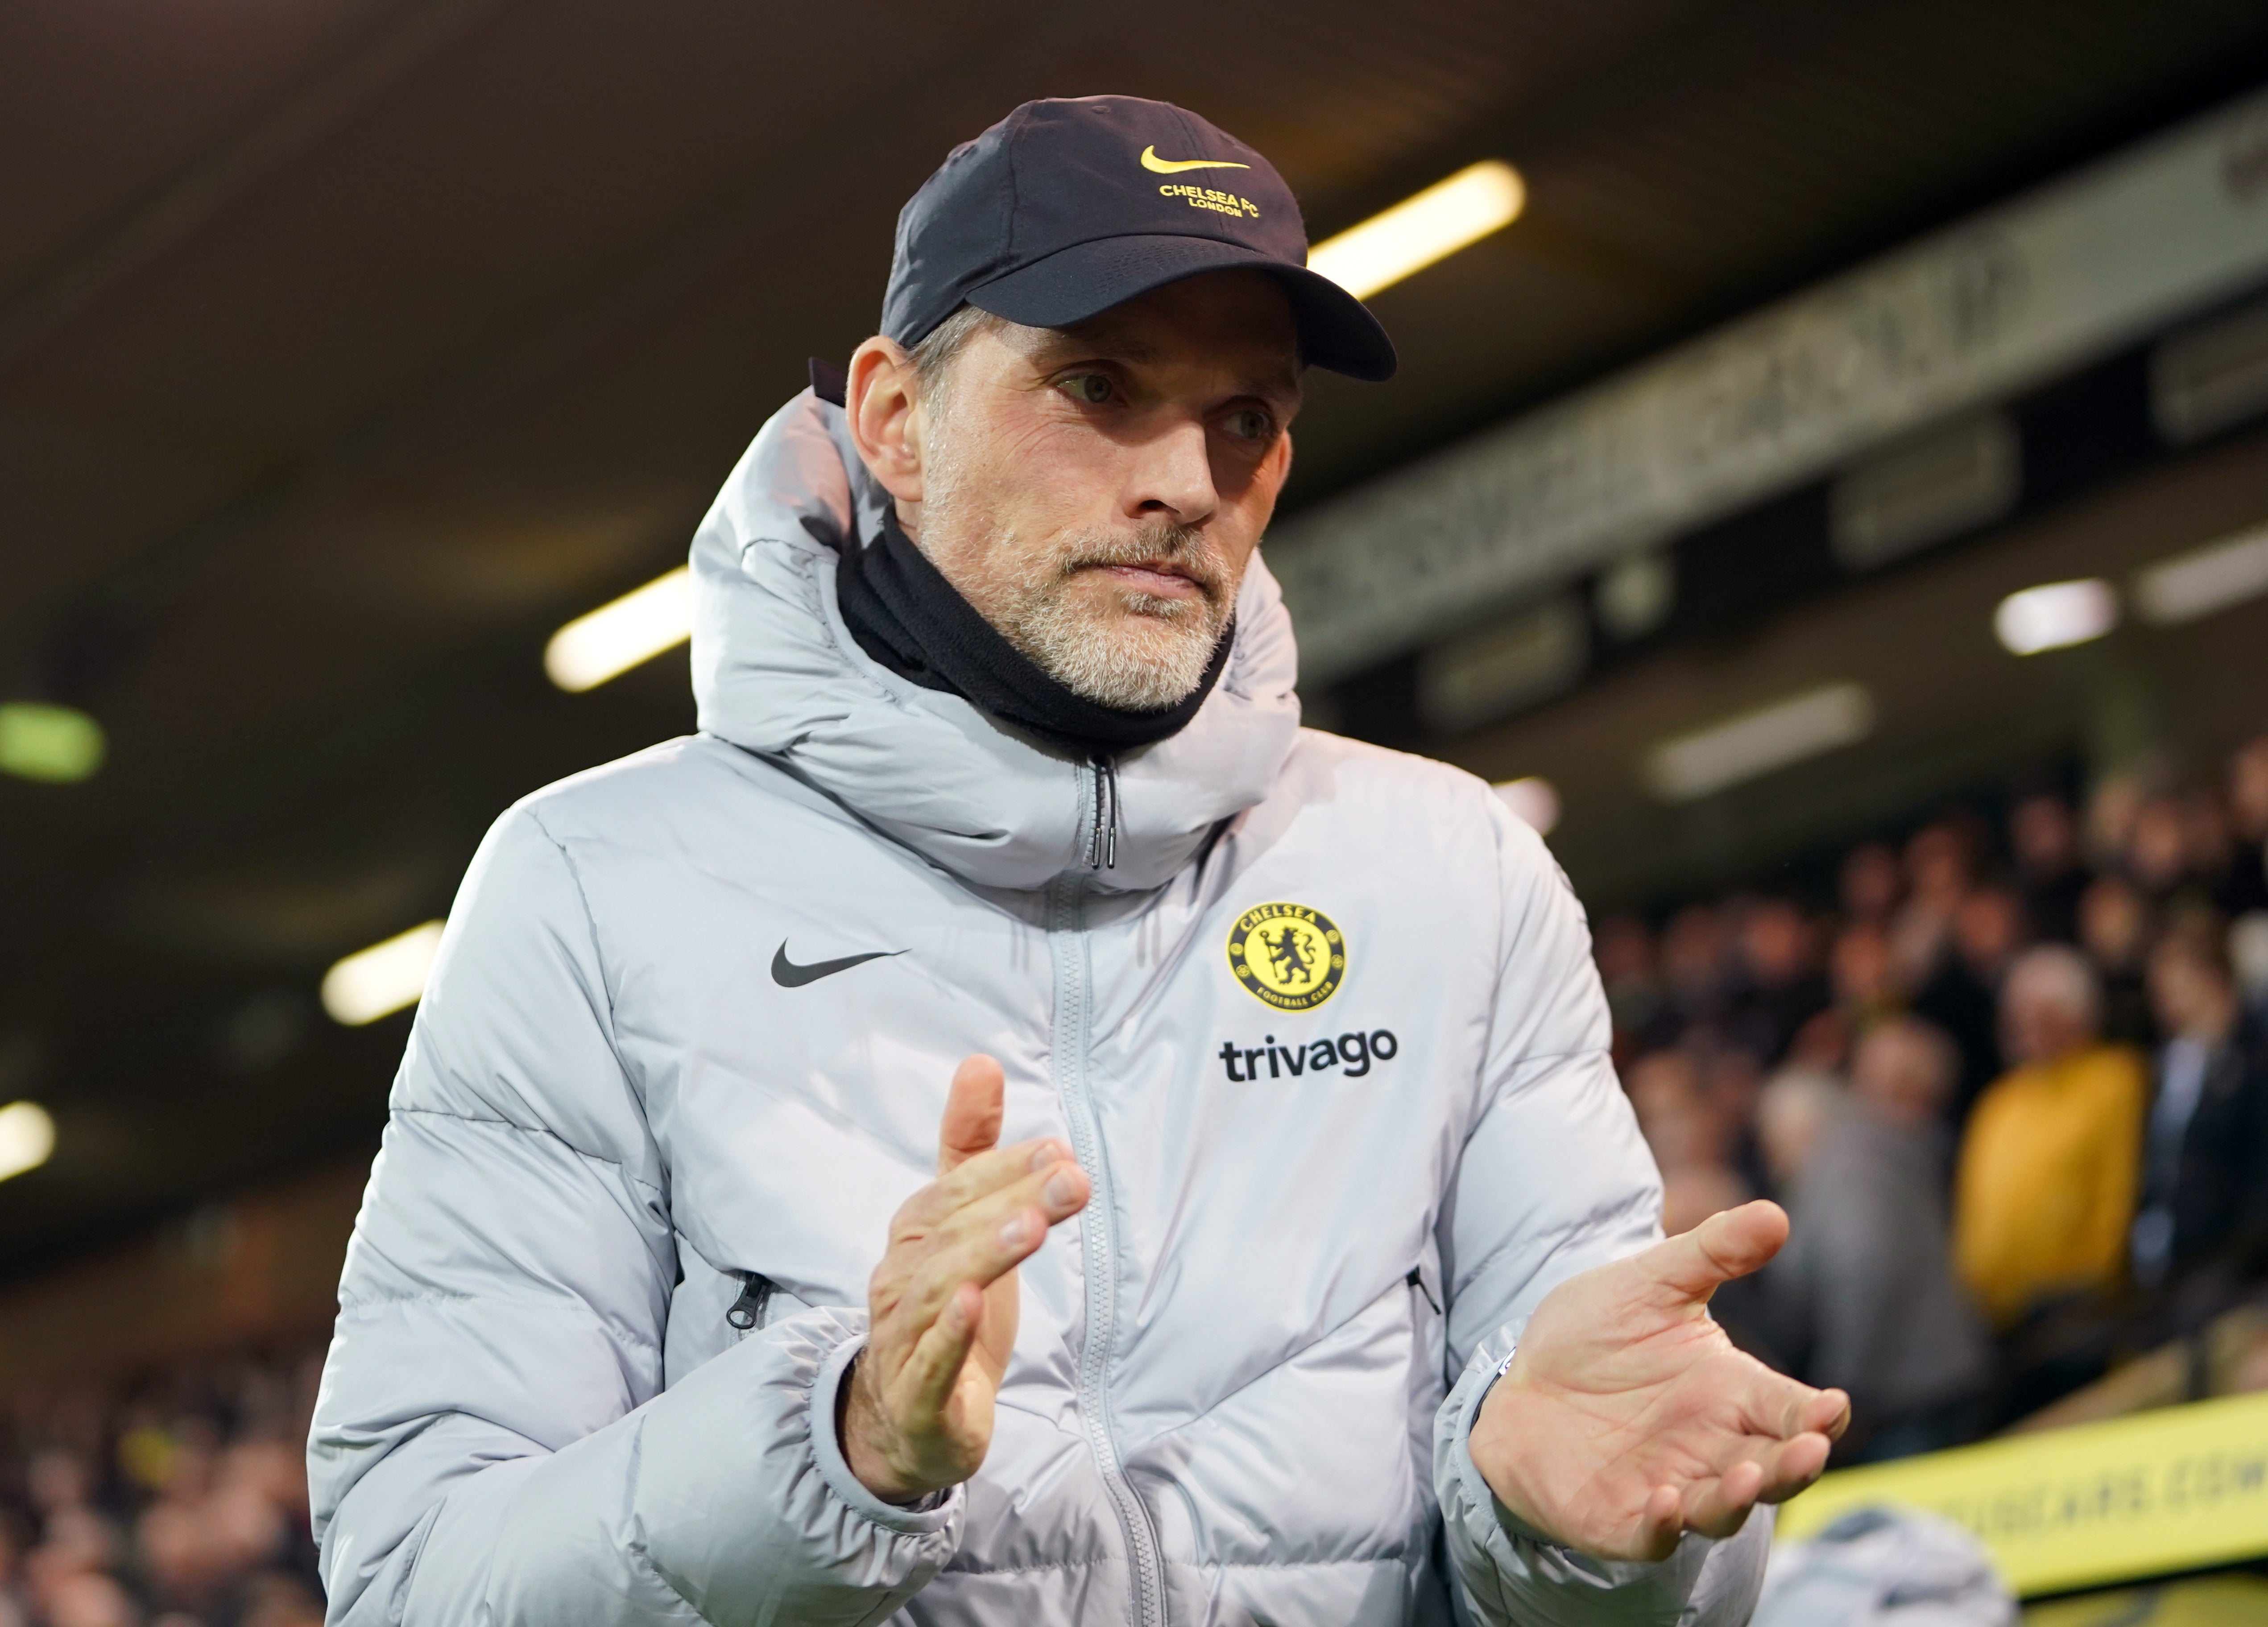 Thomas Tuchel, pictured, has confirmed he is in talks over a new Chelsea contract (Joe Giddens/PA)